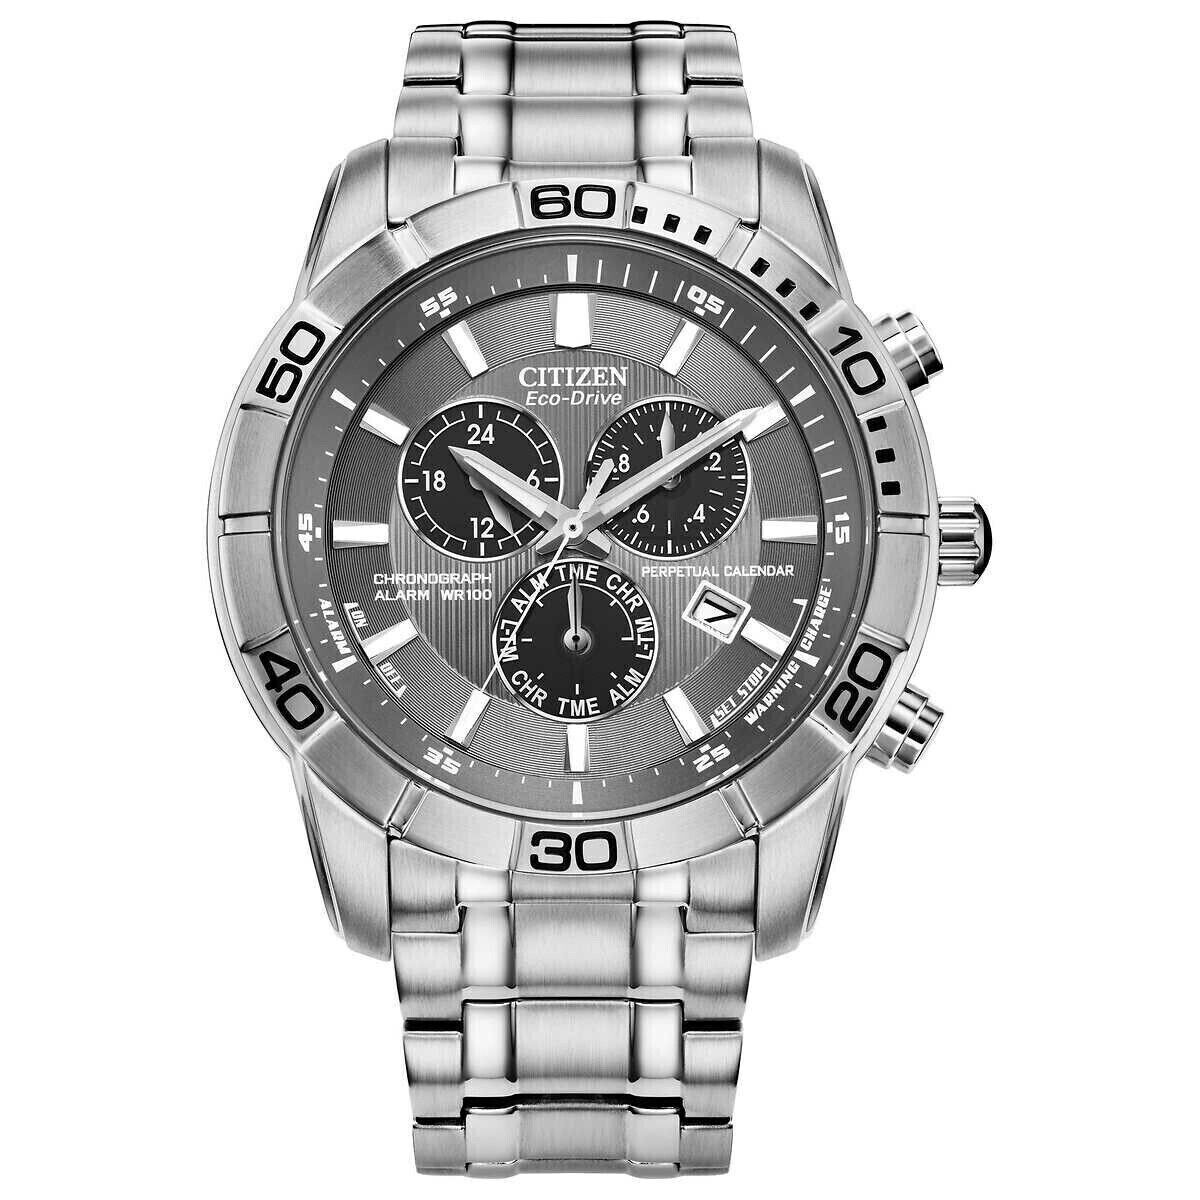 Citizen Eco-Drive Brycen Chronograph Stainless Steel Men's Watch  BL5450-54H